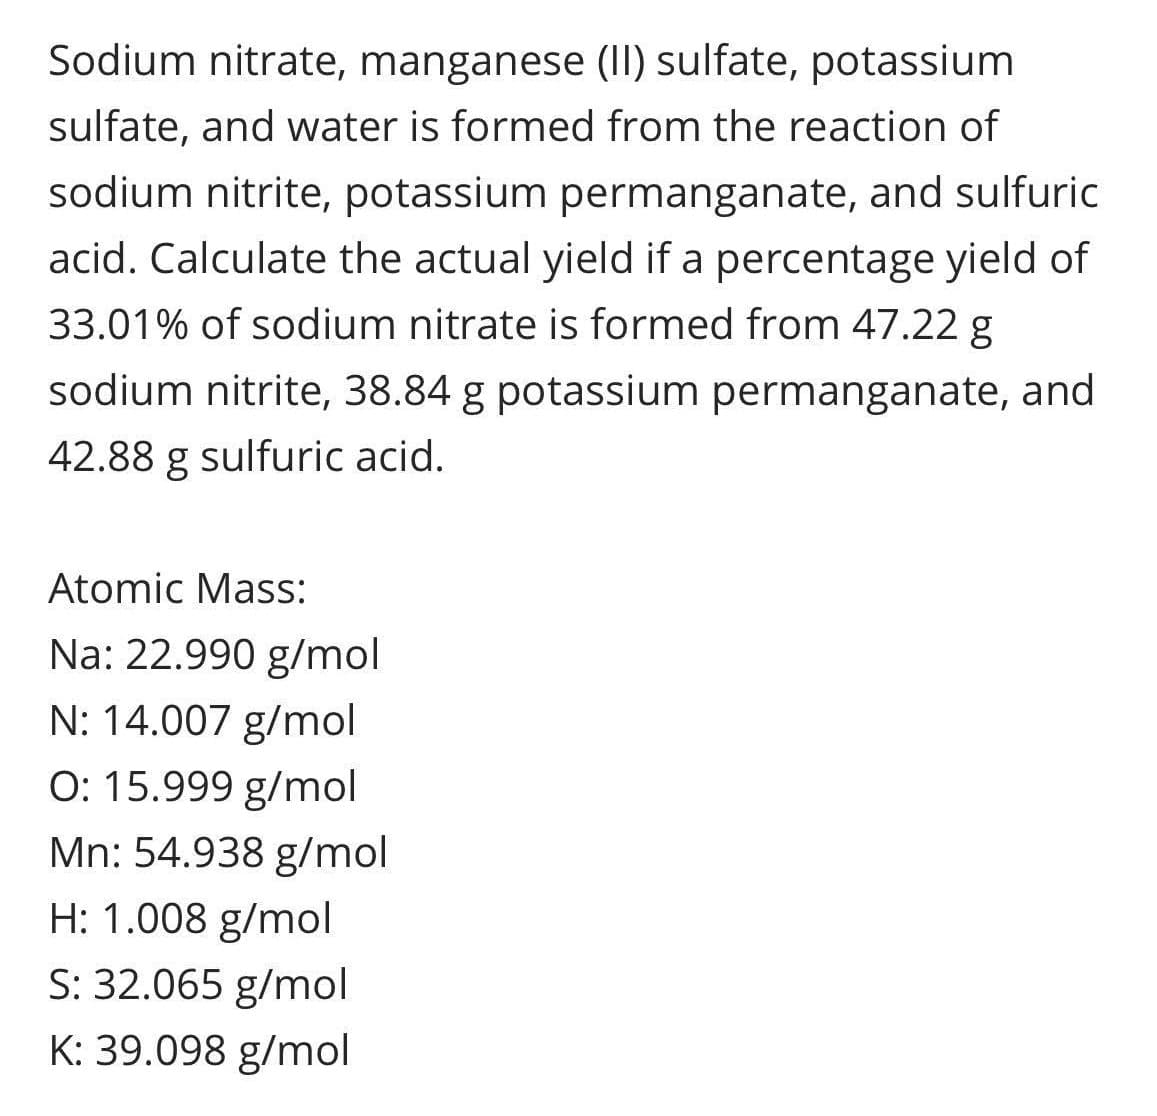 Sodium nitrate, manganese (II) sulfate, potassium
sulfate, and water is formed from the reaction of
sodium nitrite, potassium permanganate, and sulfuric
acid. Calculate the actual yield if a percentage yield of
33.01% of sodium nitrate is formed from 47.22 g
sodium nitrite, 38.84 g potassium permanganate, and
42.88 g sulfuric acid.
Atomic Mass:
Na: 22.990 g/mol
N: 14.007 g/mol
O: 15.999 g/mol
Mn: 54.938 g/mol
H: 1.008 g/mol
S: 32.065 g/mol
K: 39.098 g/mol
